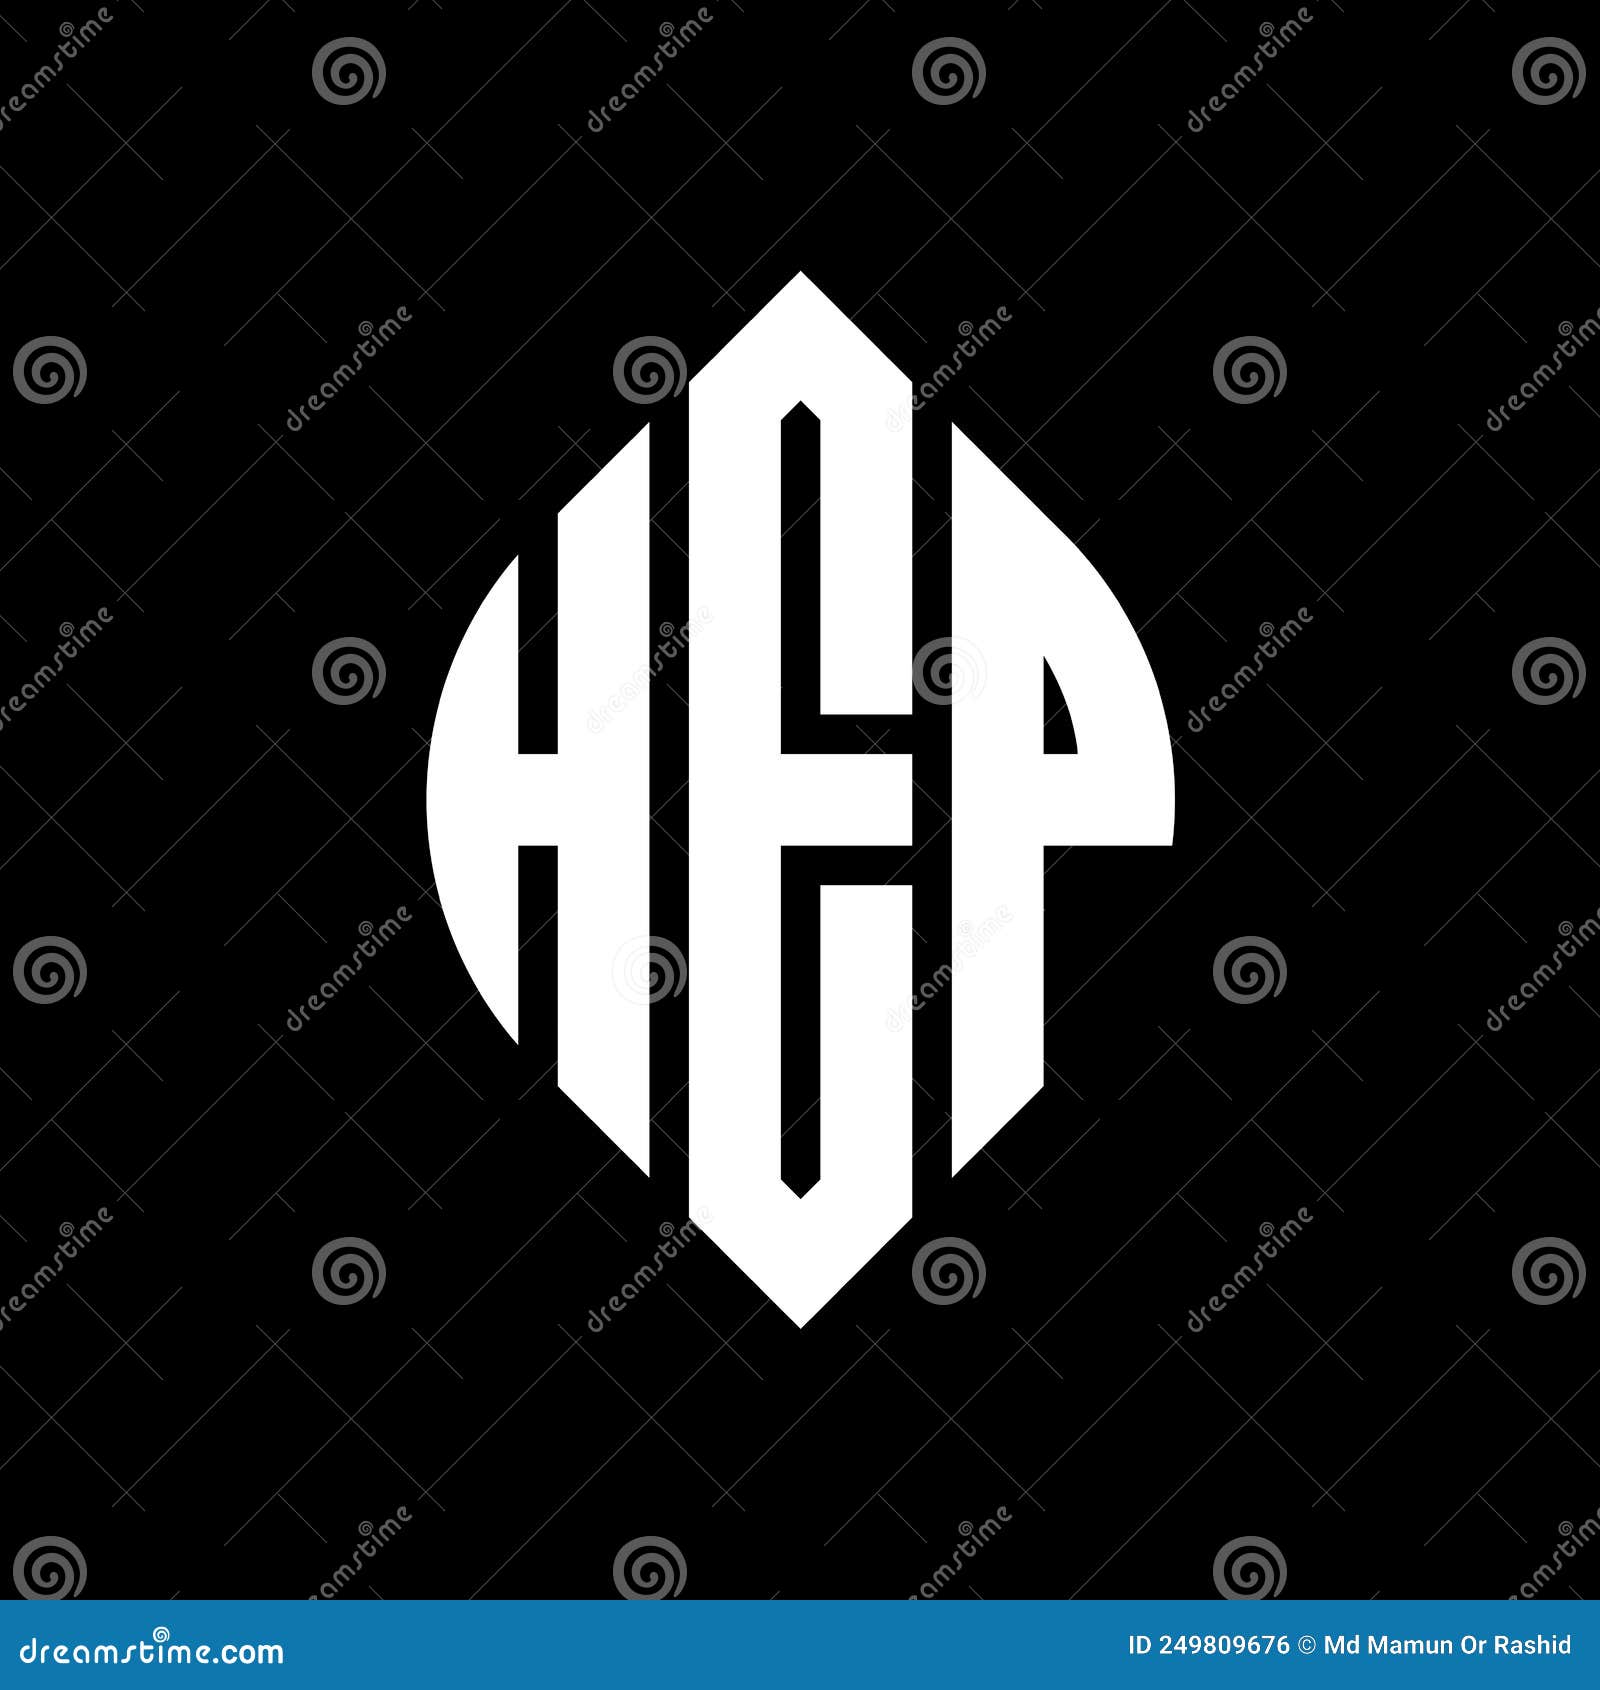 hep circle letter logo  with circle and ellipse . hep ellipse letters with typographic style. the three initials form a